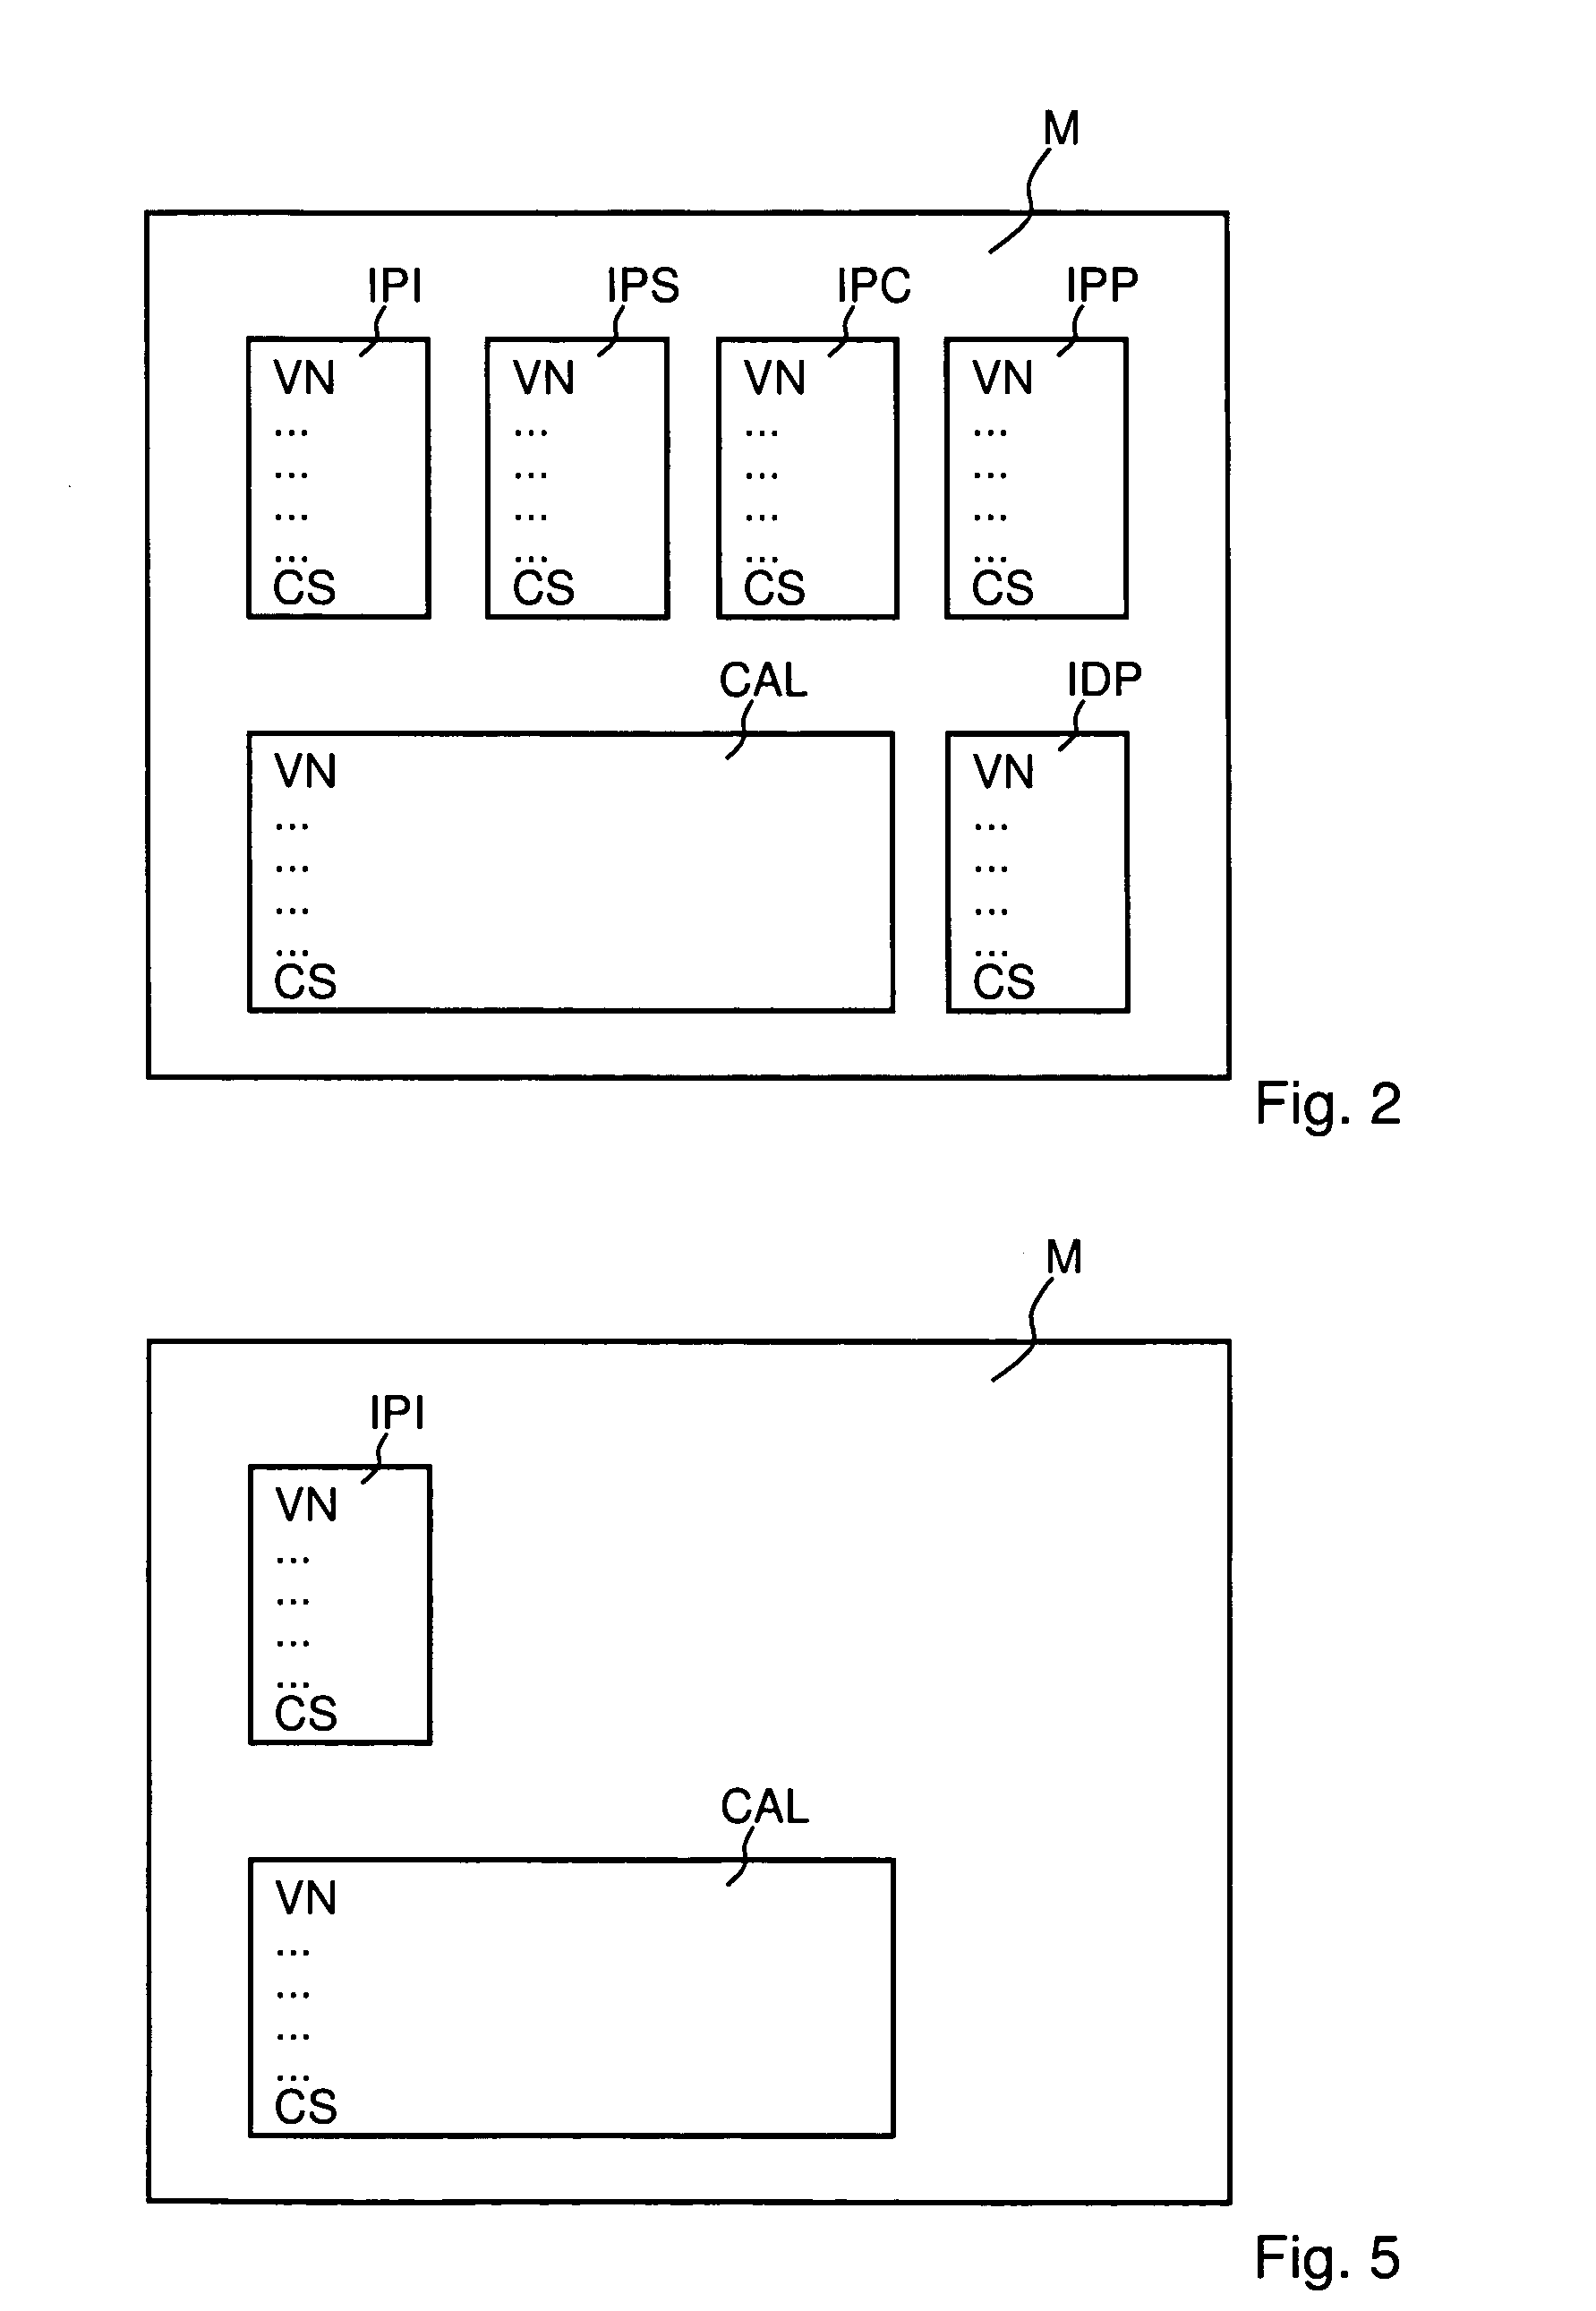 Image carrier for storing X-ray information, and a system for processing an image carrier